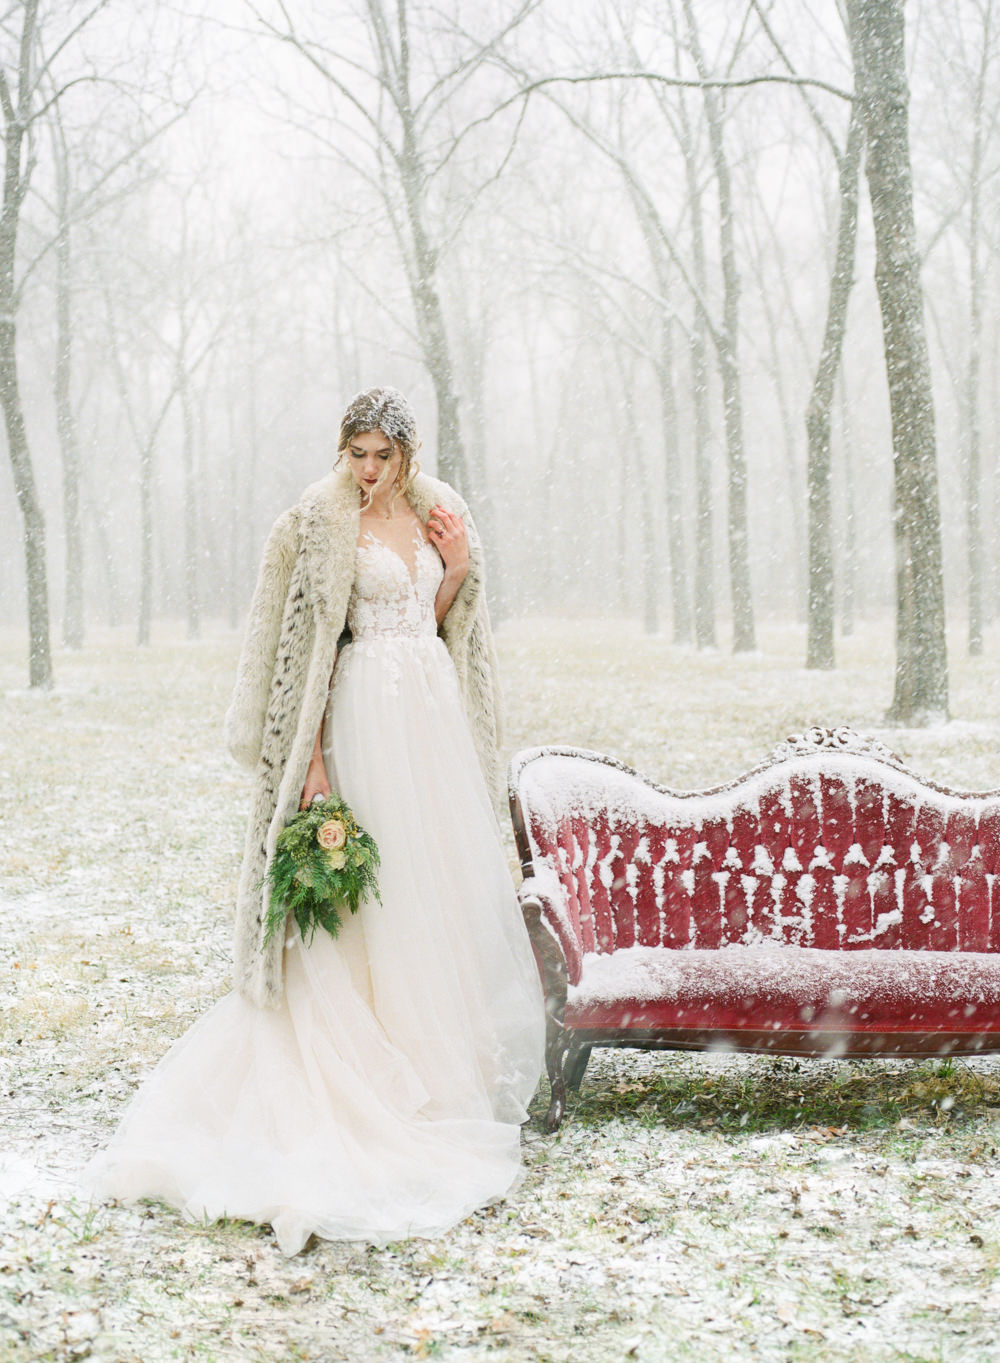 Winter wedding, Bride with fur coat and red couch in snow; St. Louis fine art film wedding photographer Erica Robnett Photography